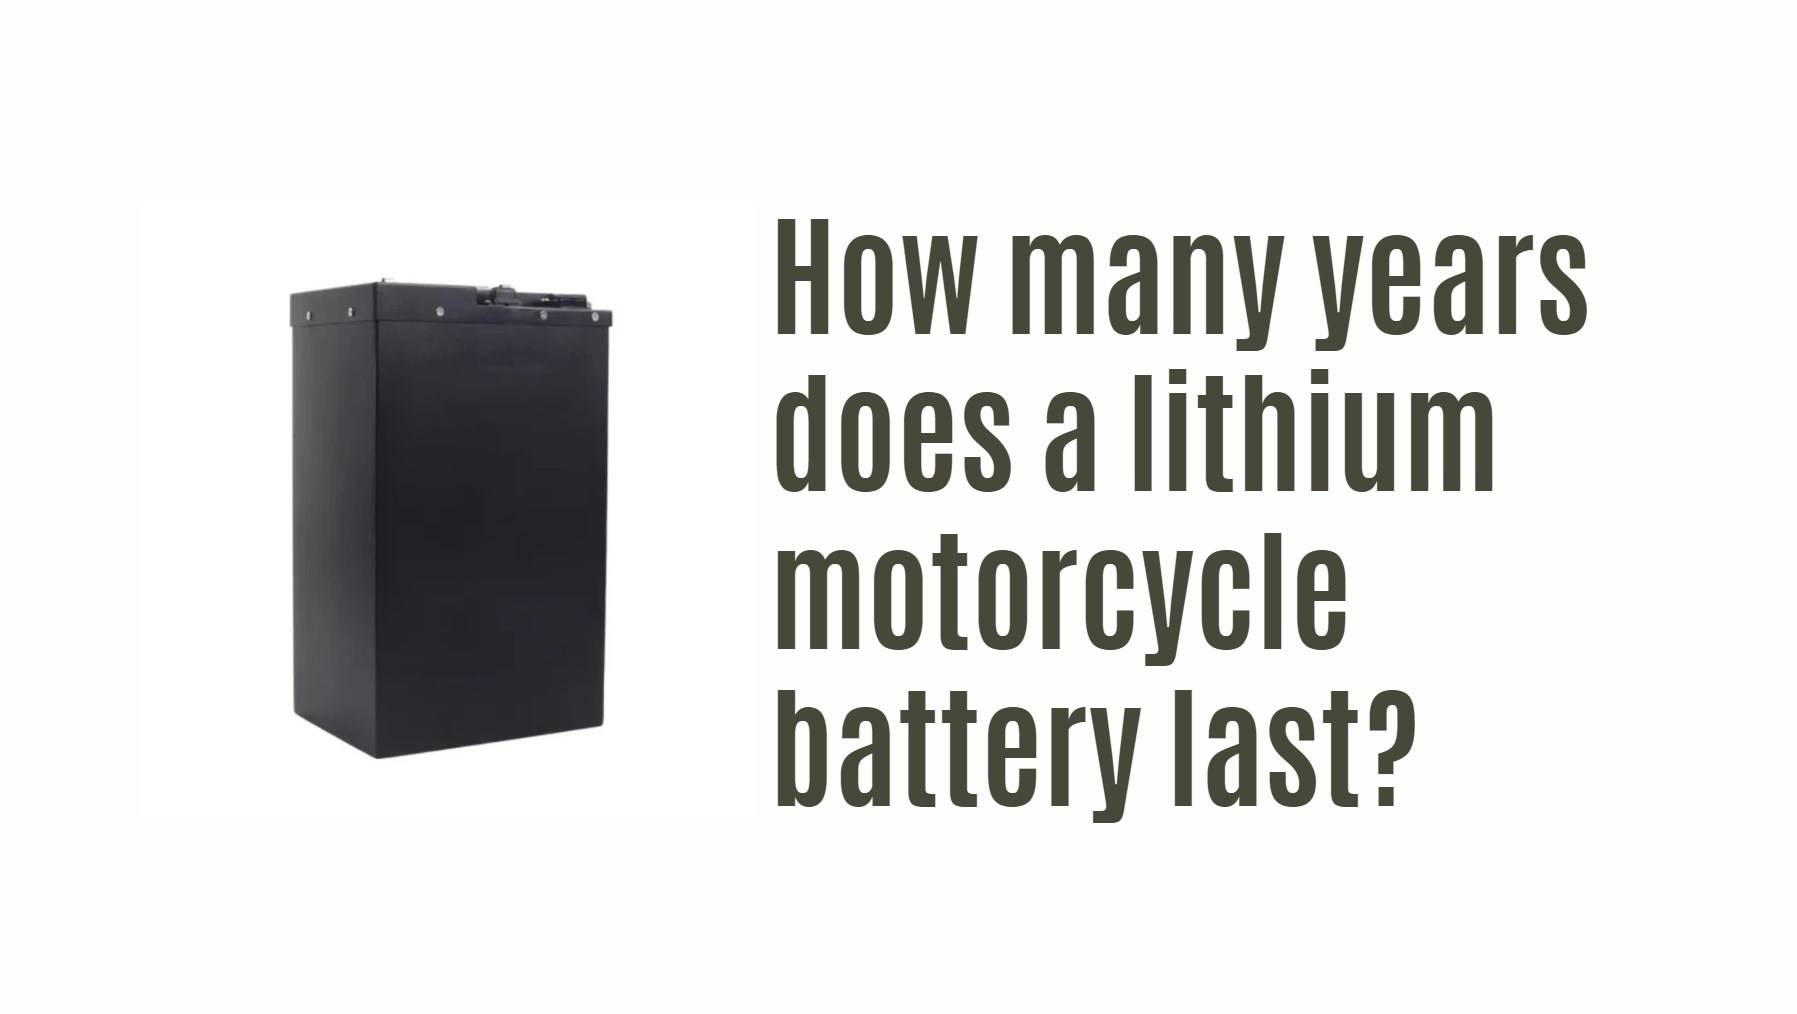 electric motorcycle lithium battery factory manufacturer oem. How many years does a lithium motorcycle battery last?